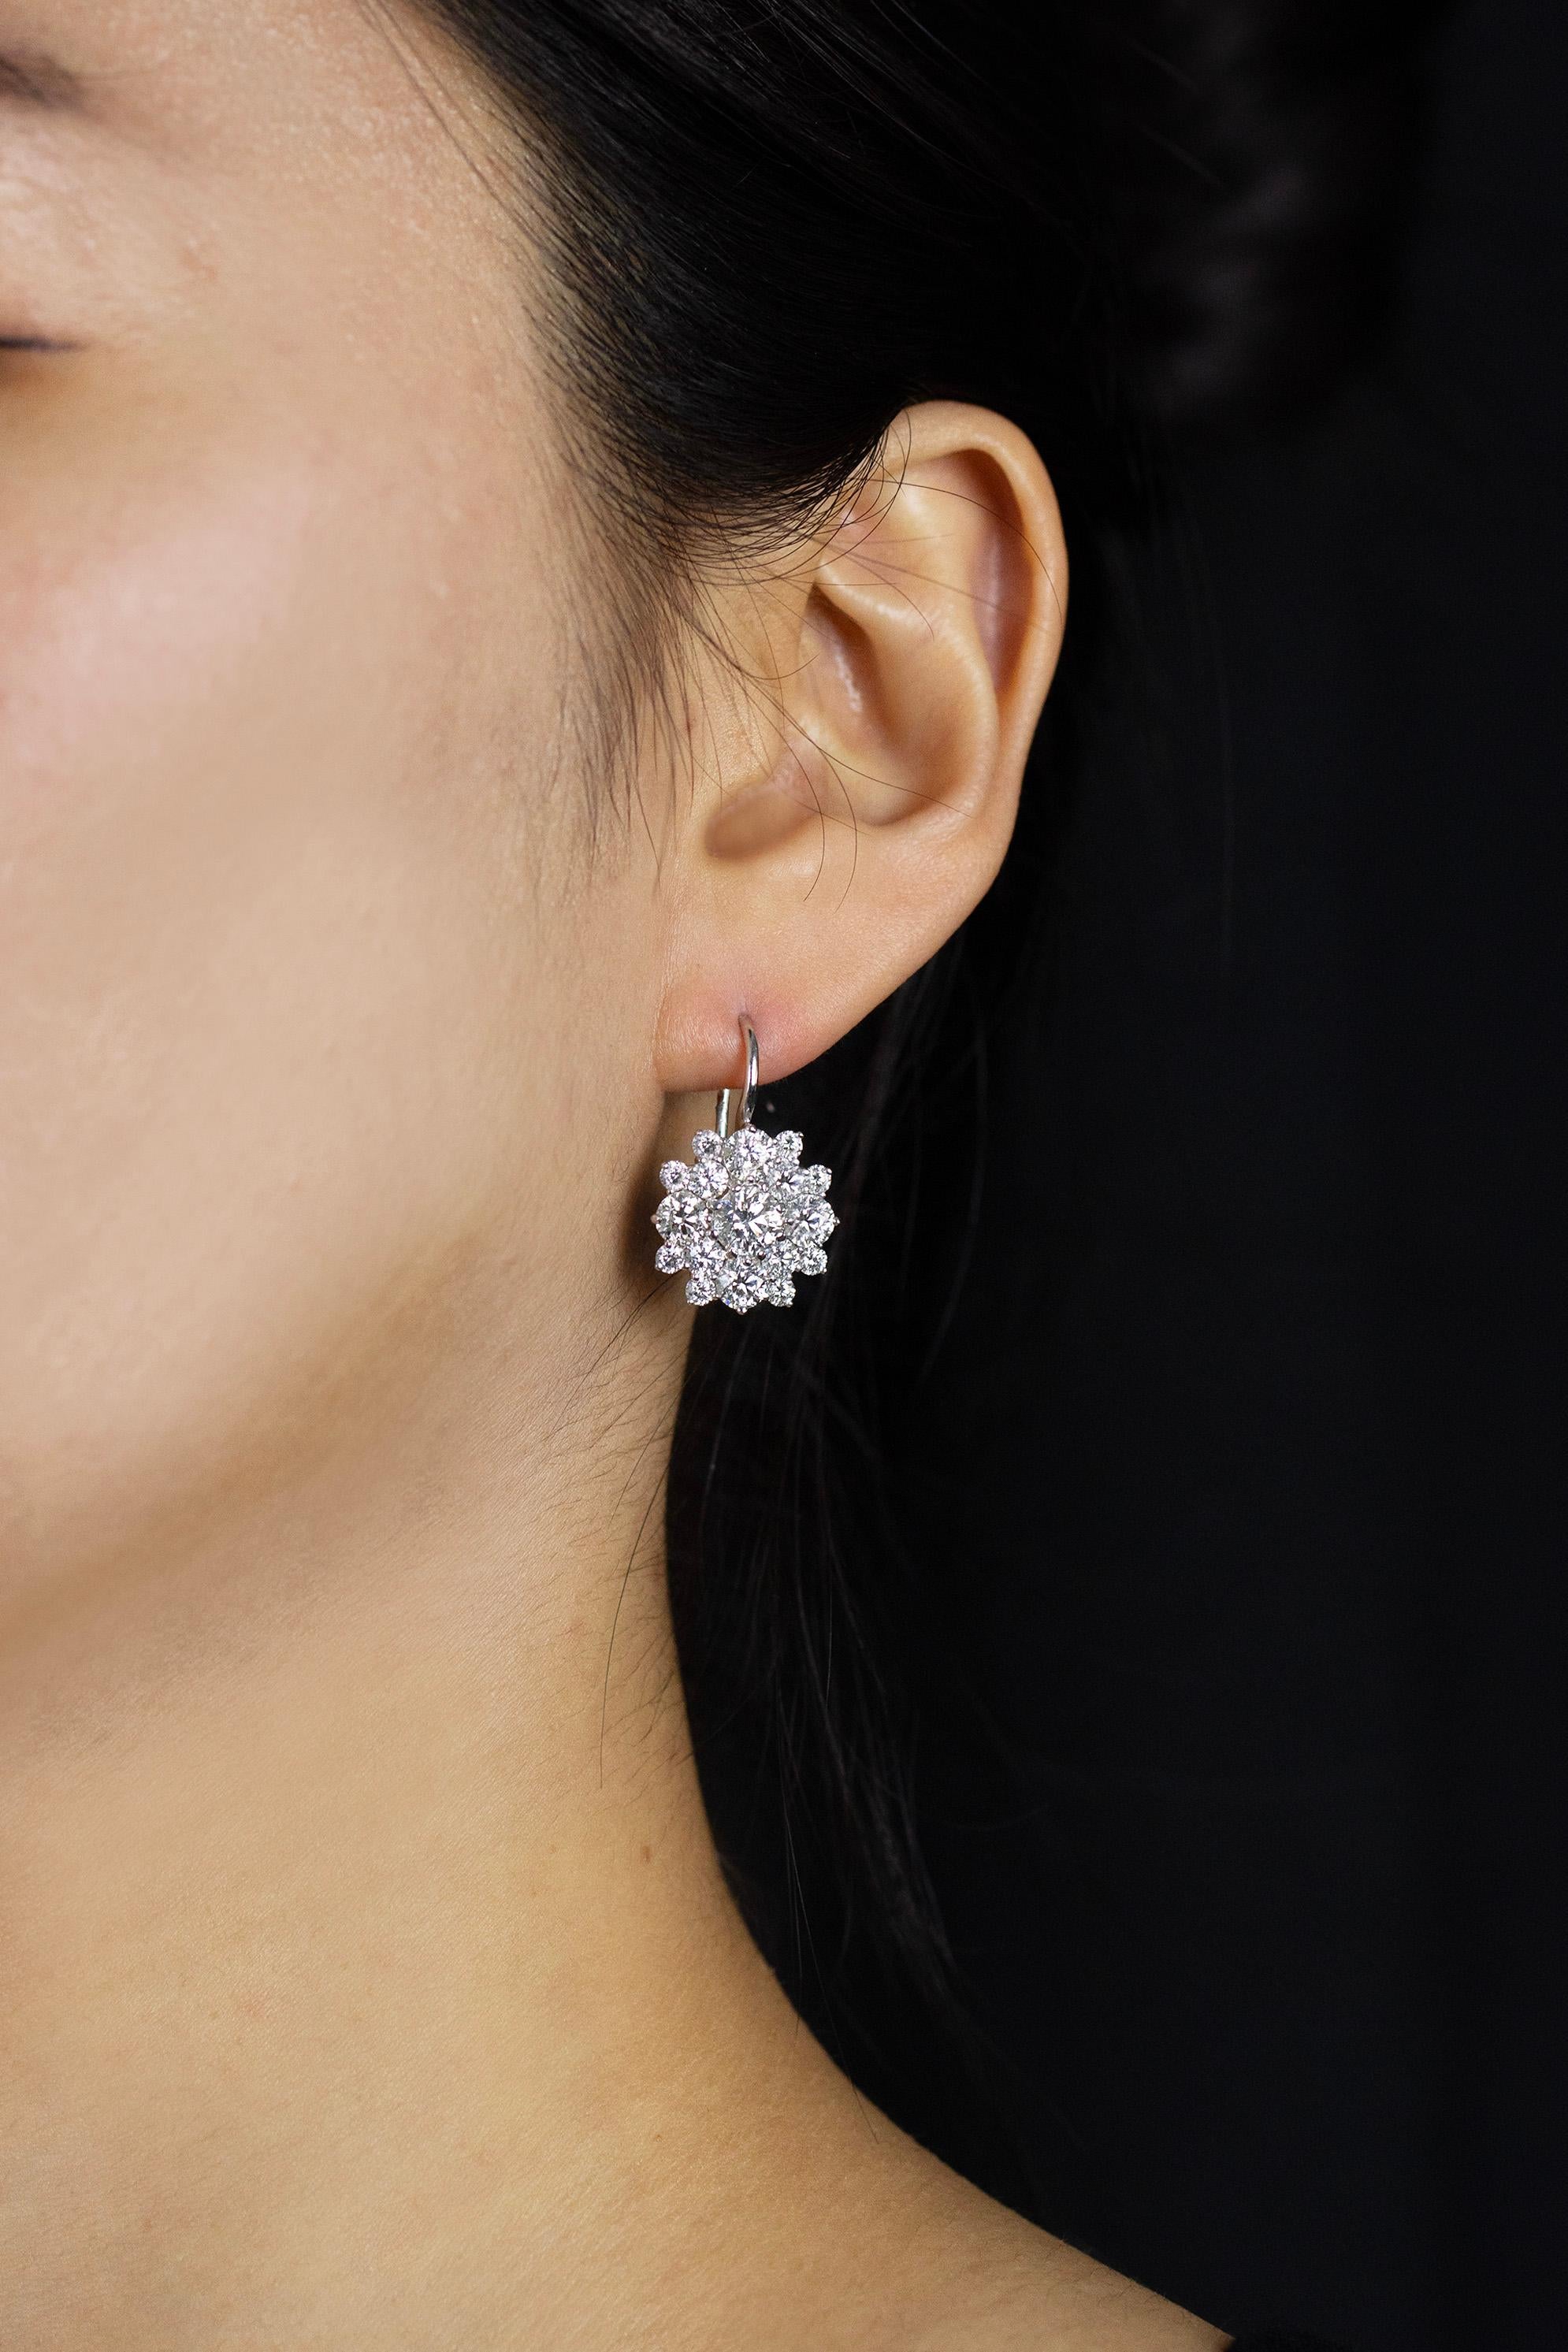 Back in the spotlight with this dazzling pair of earrings created by Ivanka Trump. Creative and unique starburst design encrusted with round brilliant diamonds weighing a stunning 5.80 carats total. Attached to hand-crafted 18k white gold french